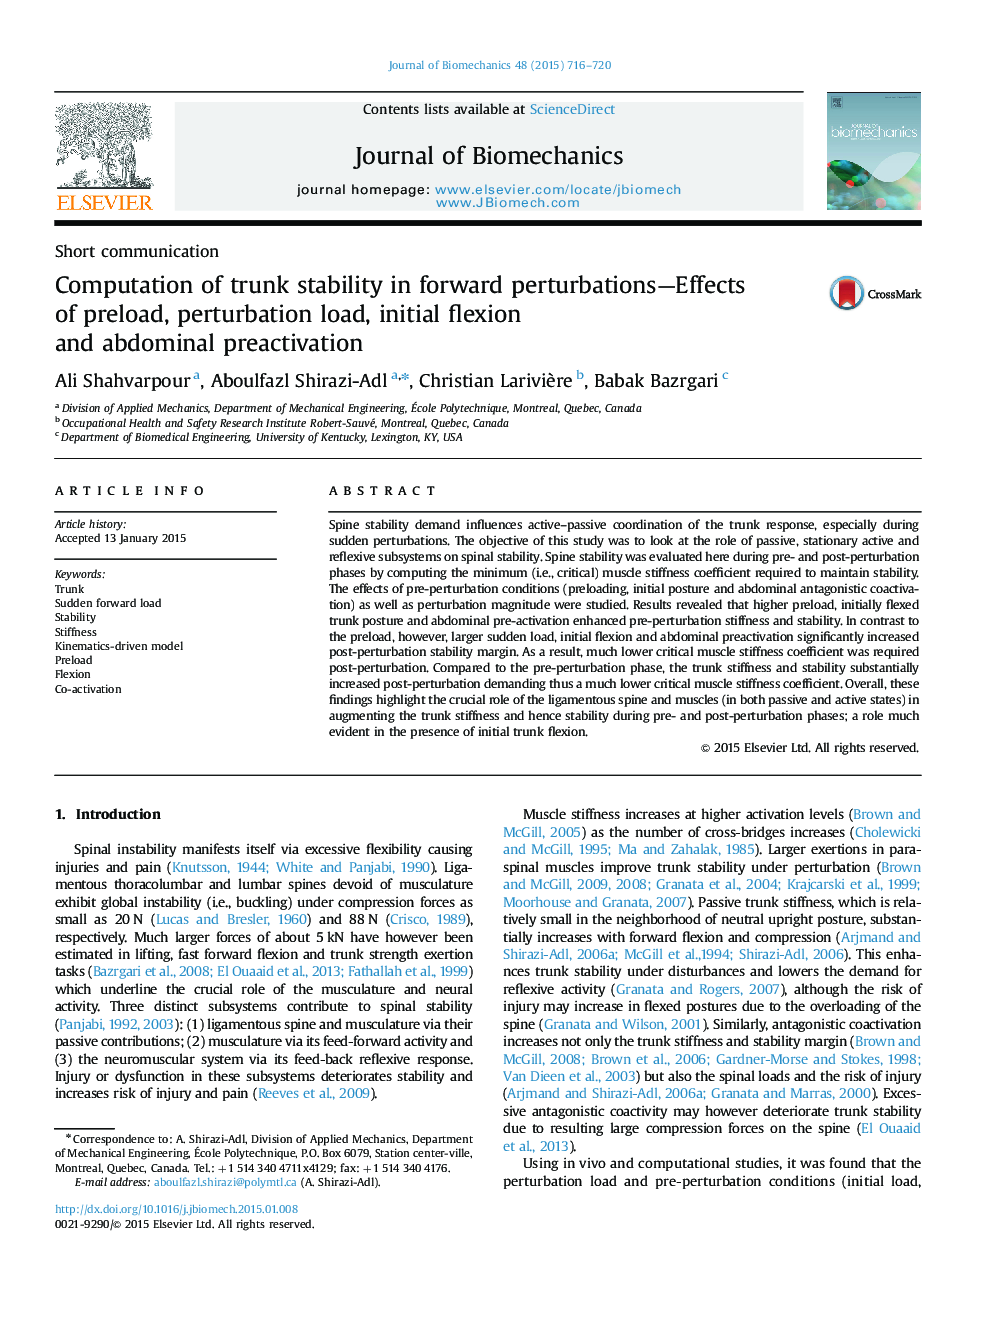 Computation of trunk stability in forward perturbations-Effects of preload, perturbation load, initial flexion and abdominal preactivation